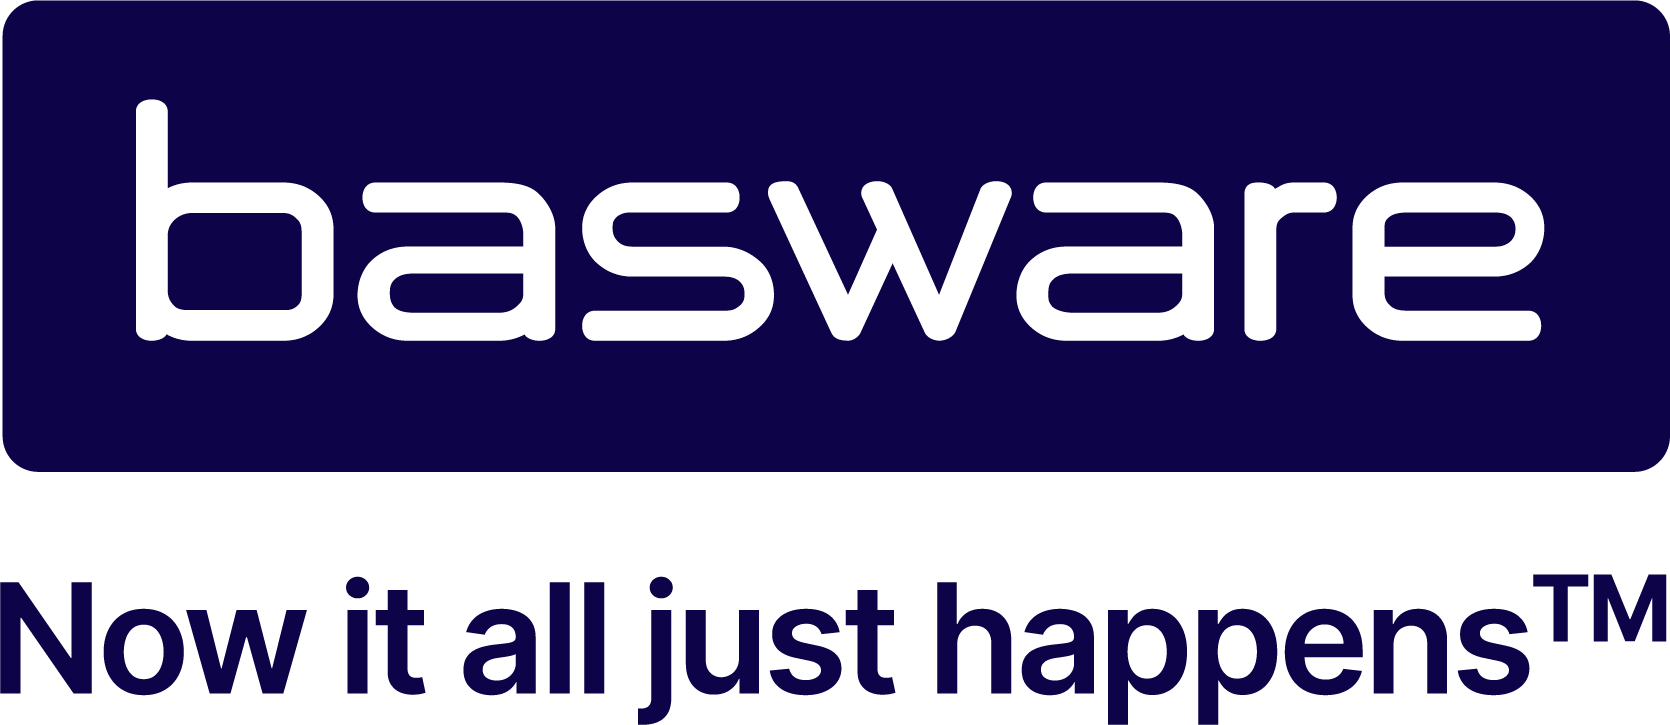 Basware-Secondary-With-Tagline-TM-Vertical-Blue-RGB